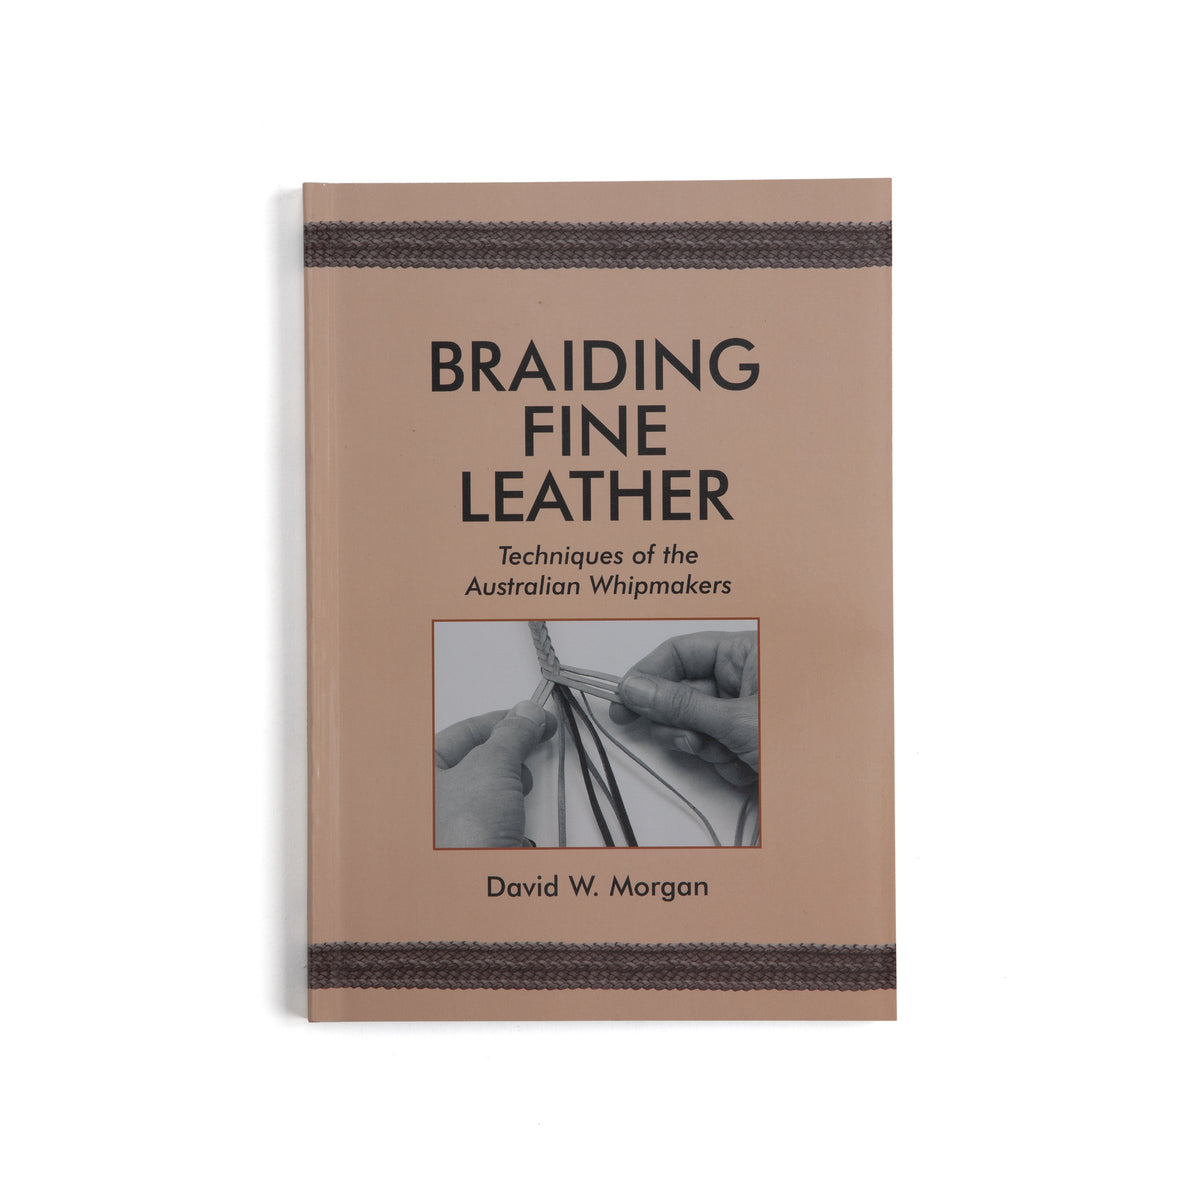 Braiding Fine Leather: Techniques of the Australian Whipmakers [Book]